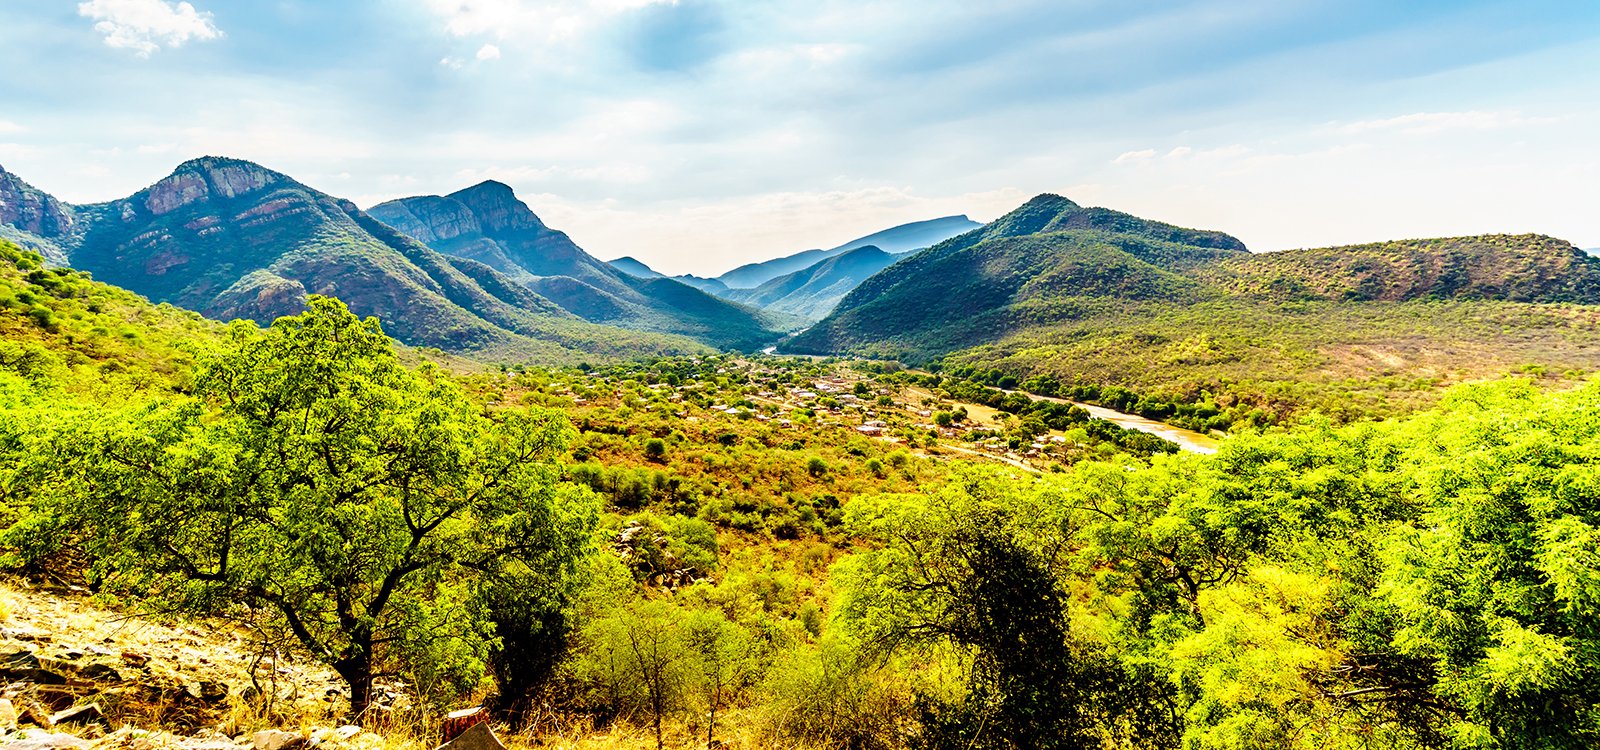 <p>Around two-thirds of Mpumalanga’s land is used for agriculture, including natural grazing land and farming</p>
